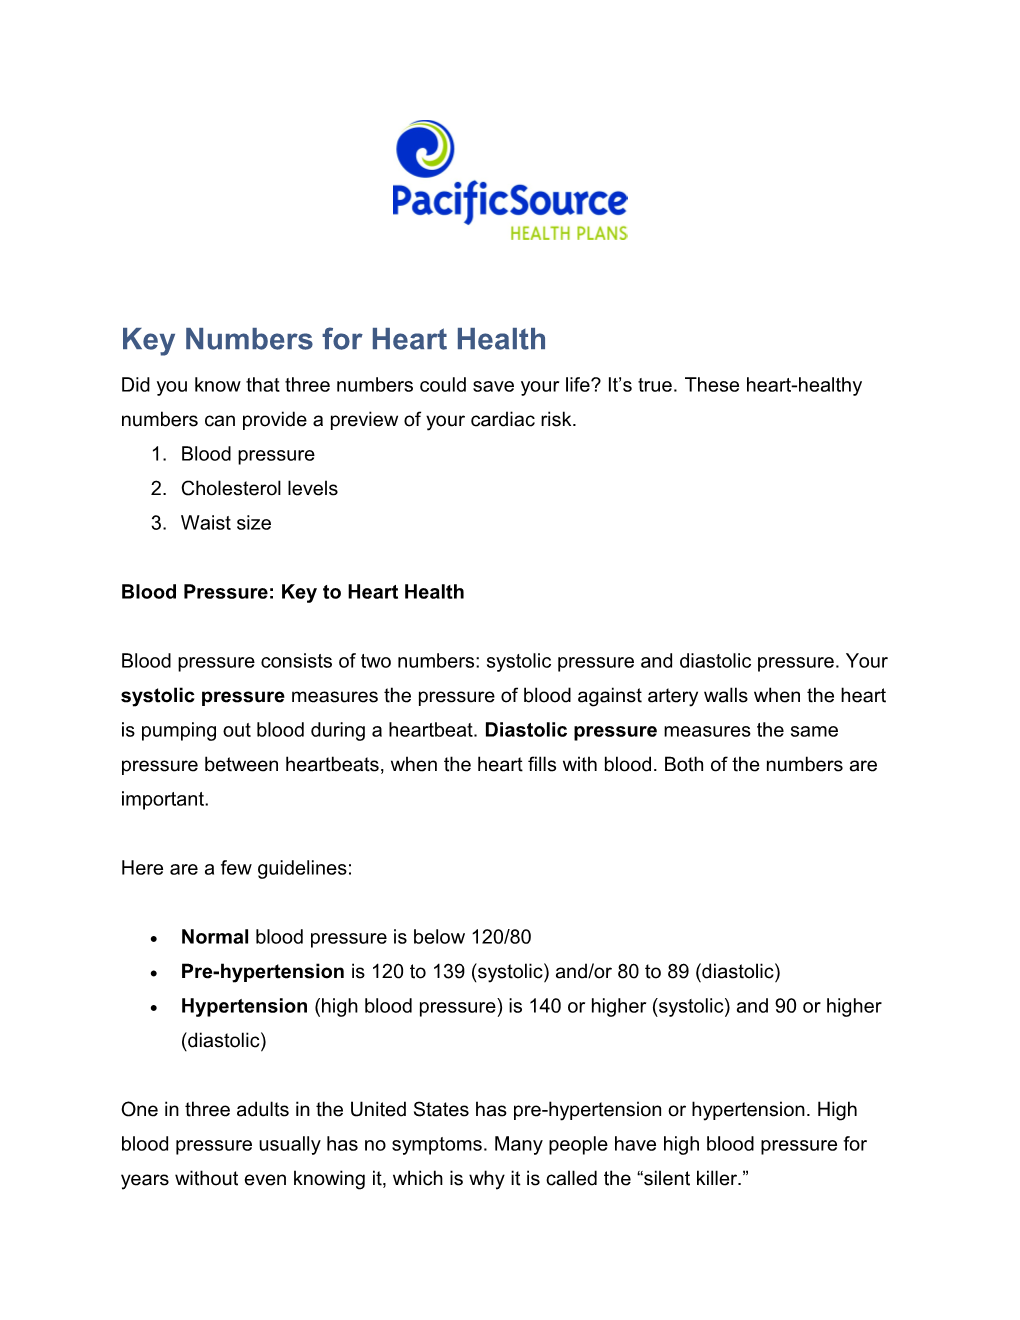 Key Numbers for Heart Health